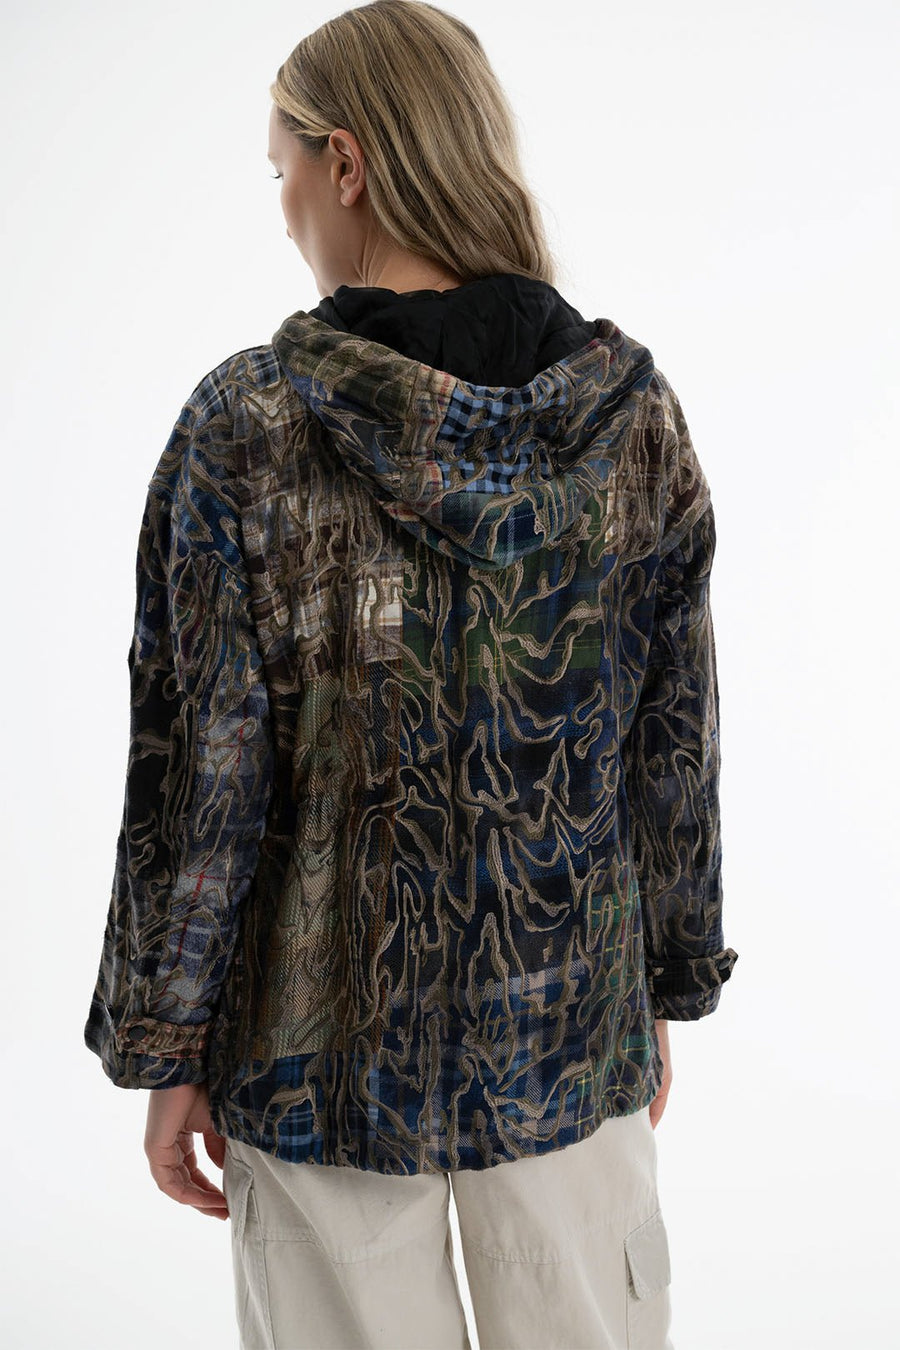 THE DRYAD HOODIE, MULTI - Burning Torch Online Boutique